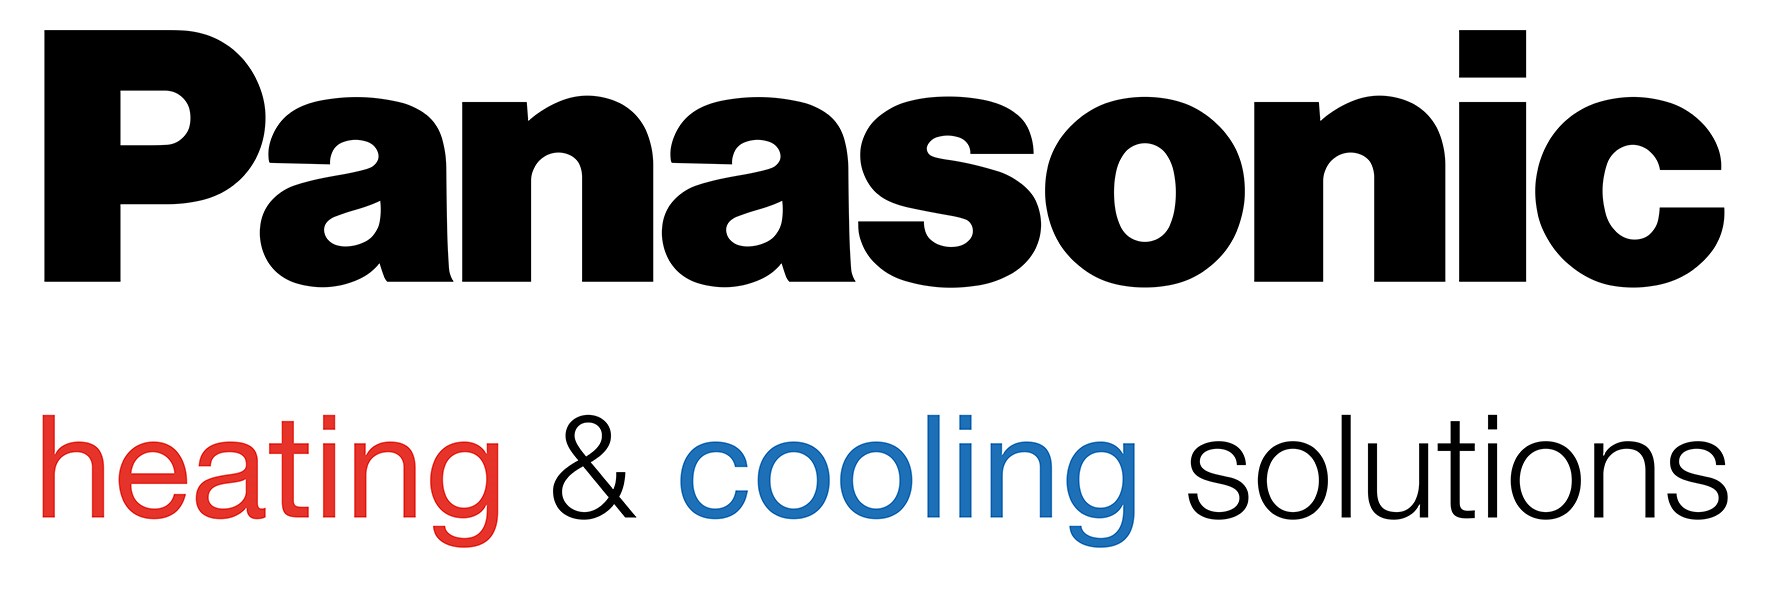 Panasonic Air Conditioners Are Now Ready for Voice Control @PanasonicHC_UK - Refurb & Developer Update